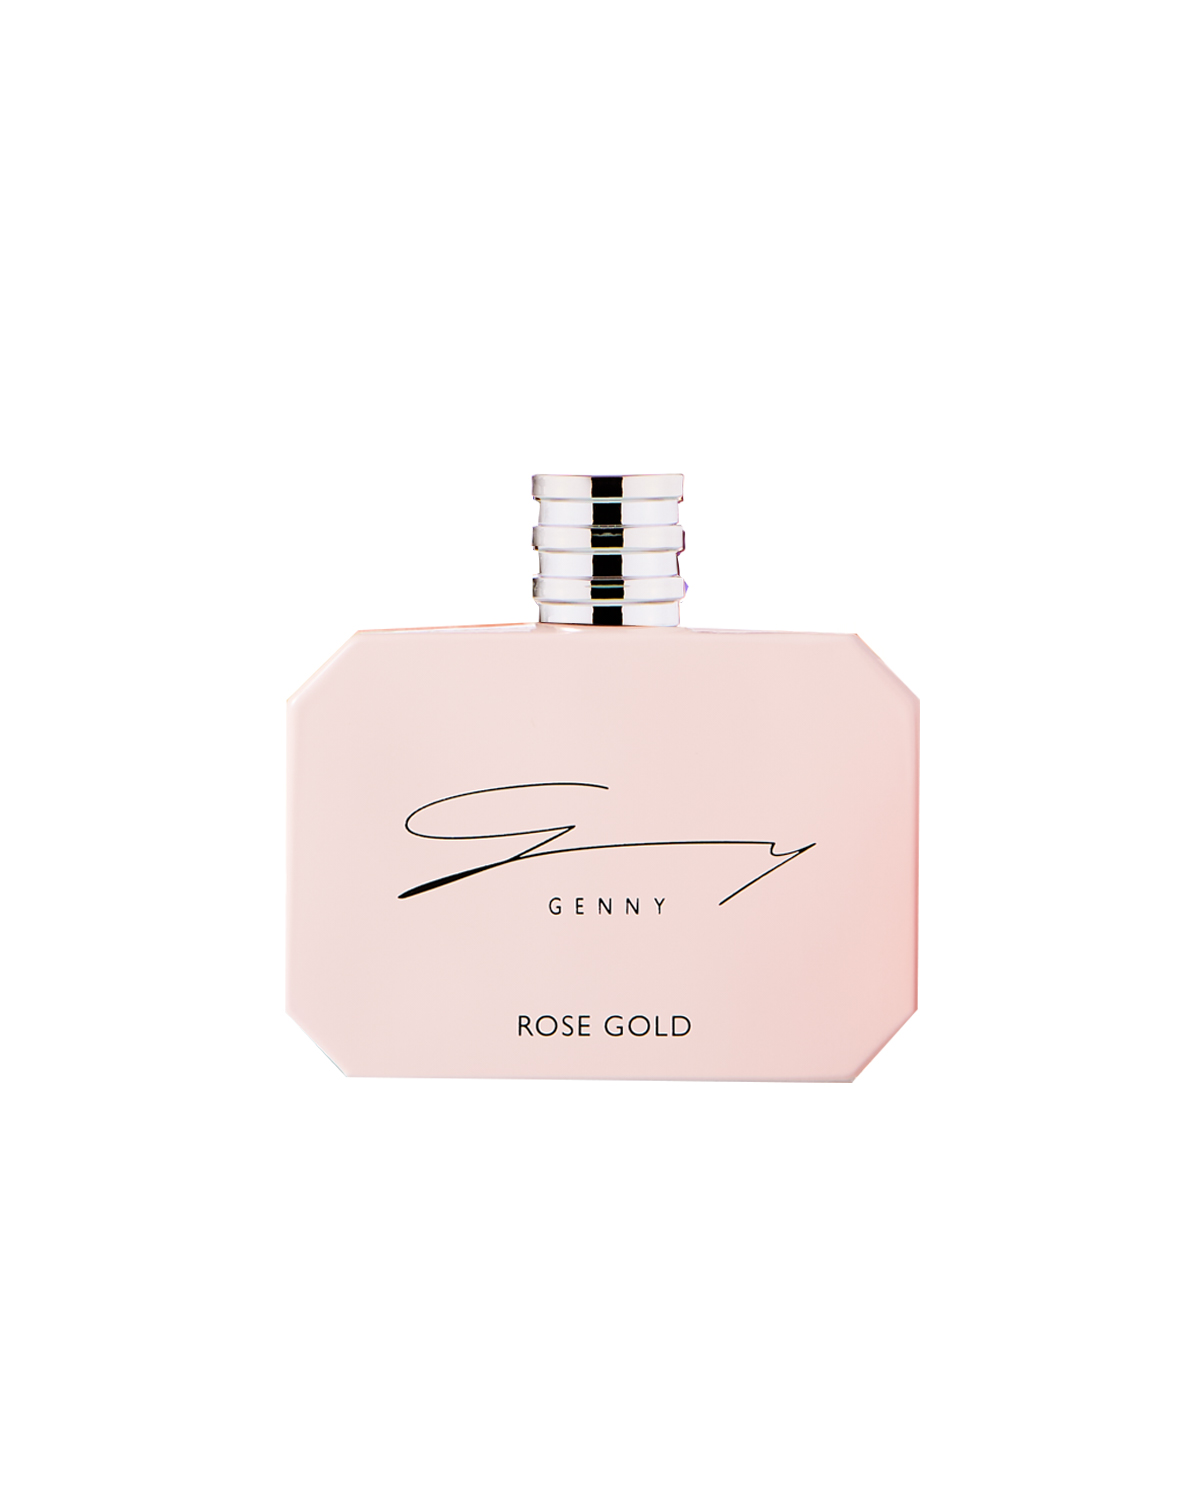 Perfume rose gold by Genny